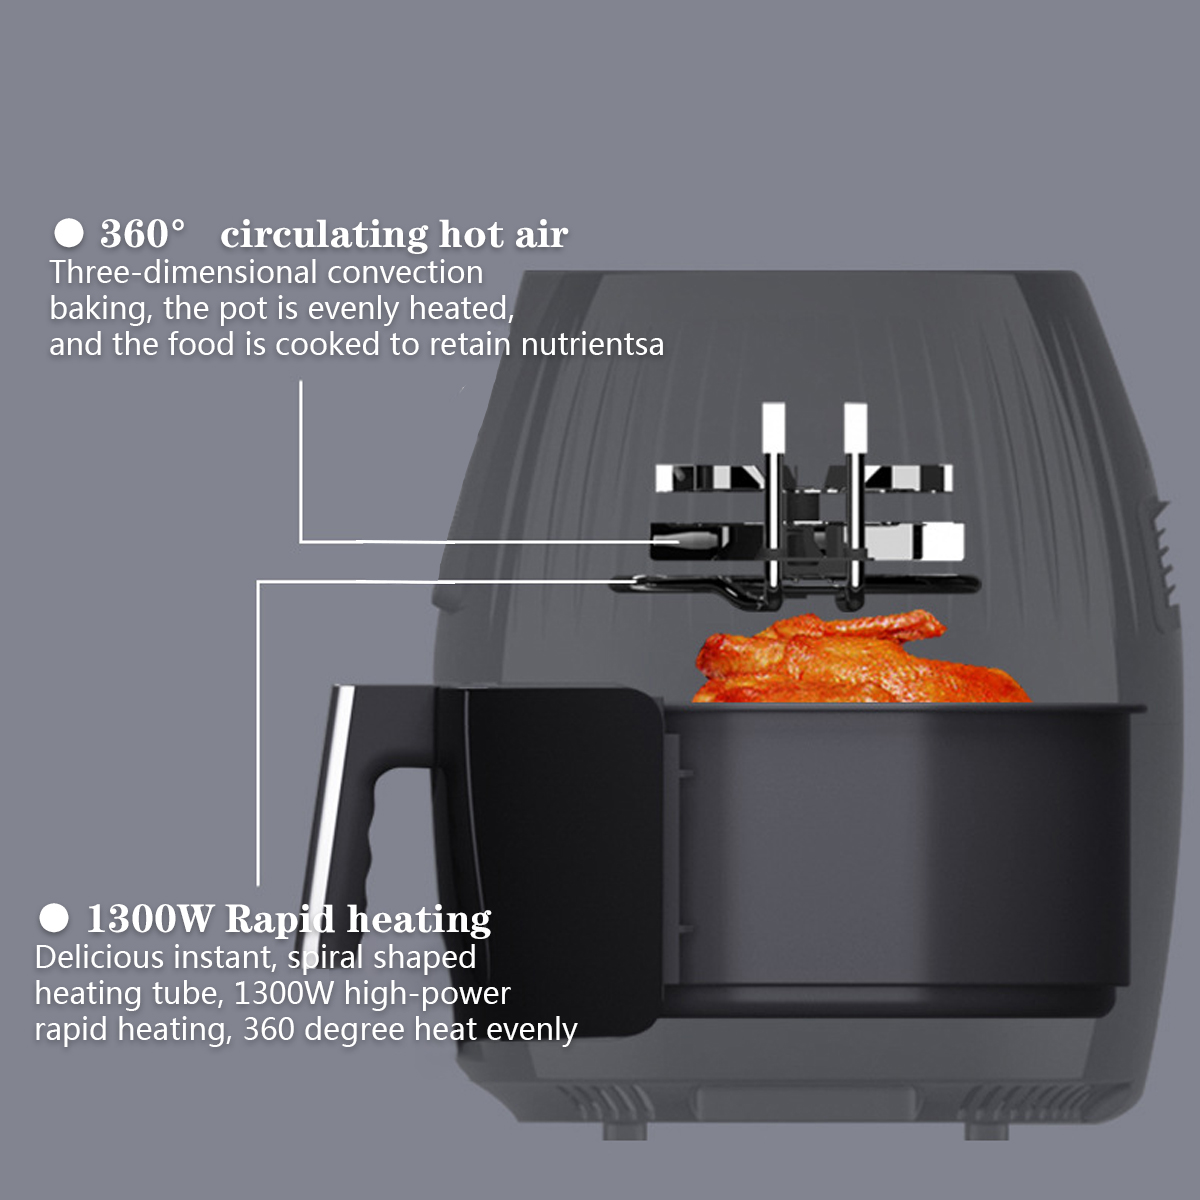 1300W-Electric-Hot-Air-Fryers-Oven-Oilless-Cooker-55L-Large-Capacity-Touch-Screen-360deg-Cycle-Heati-1847660-9